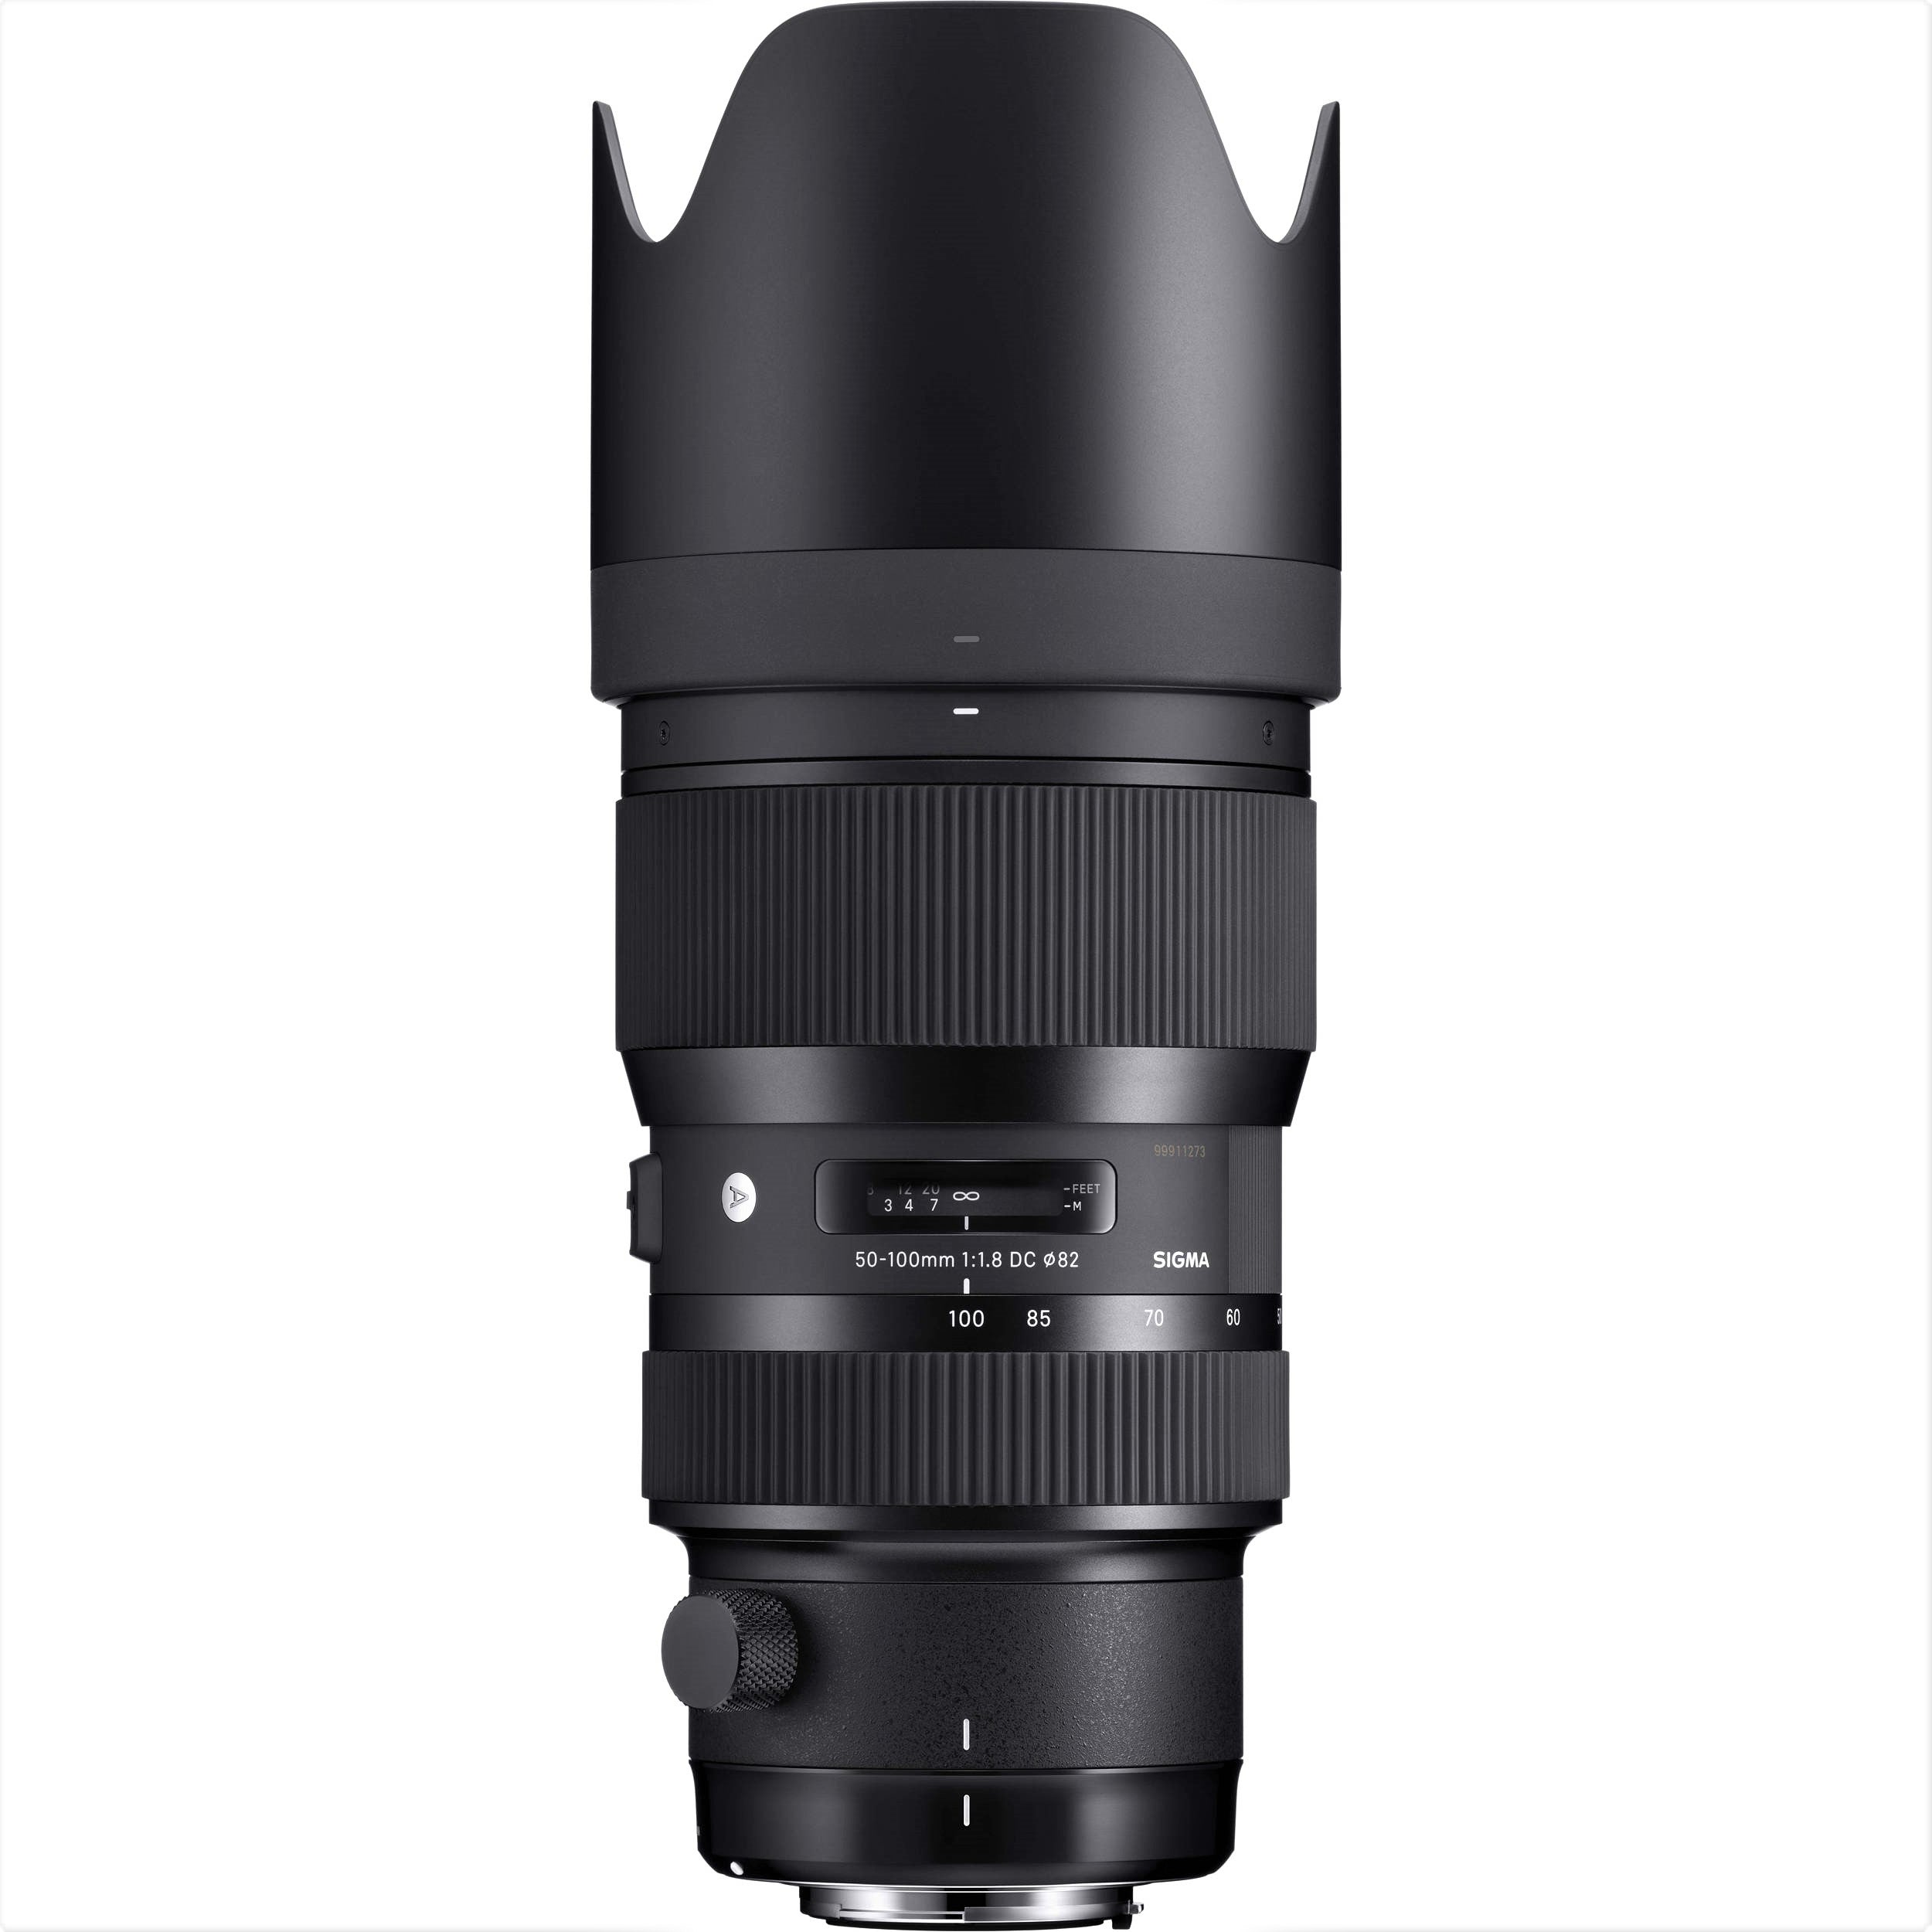 Sigma 50-100mm F1.8 DC HSM Art Lens for Nikon F with Attached Lens Hood on the Top